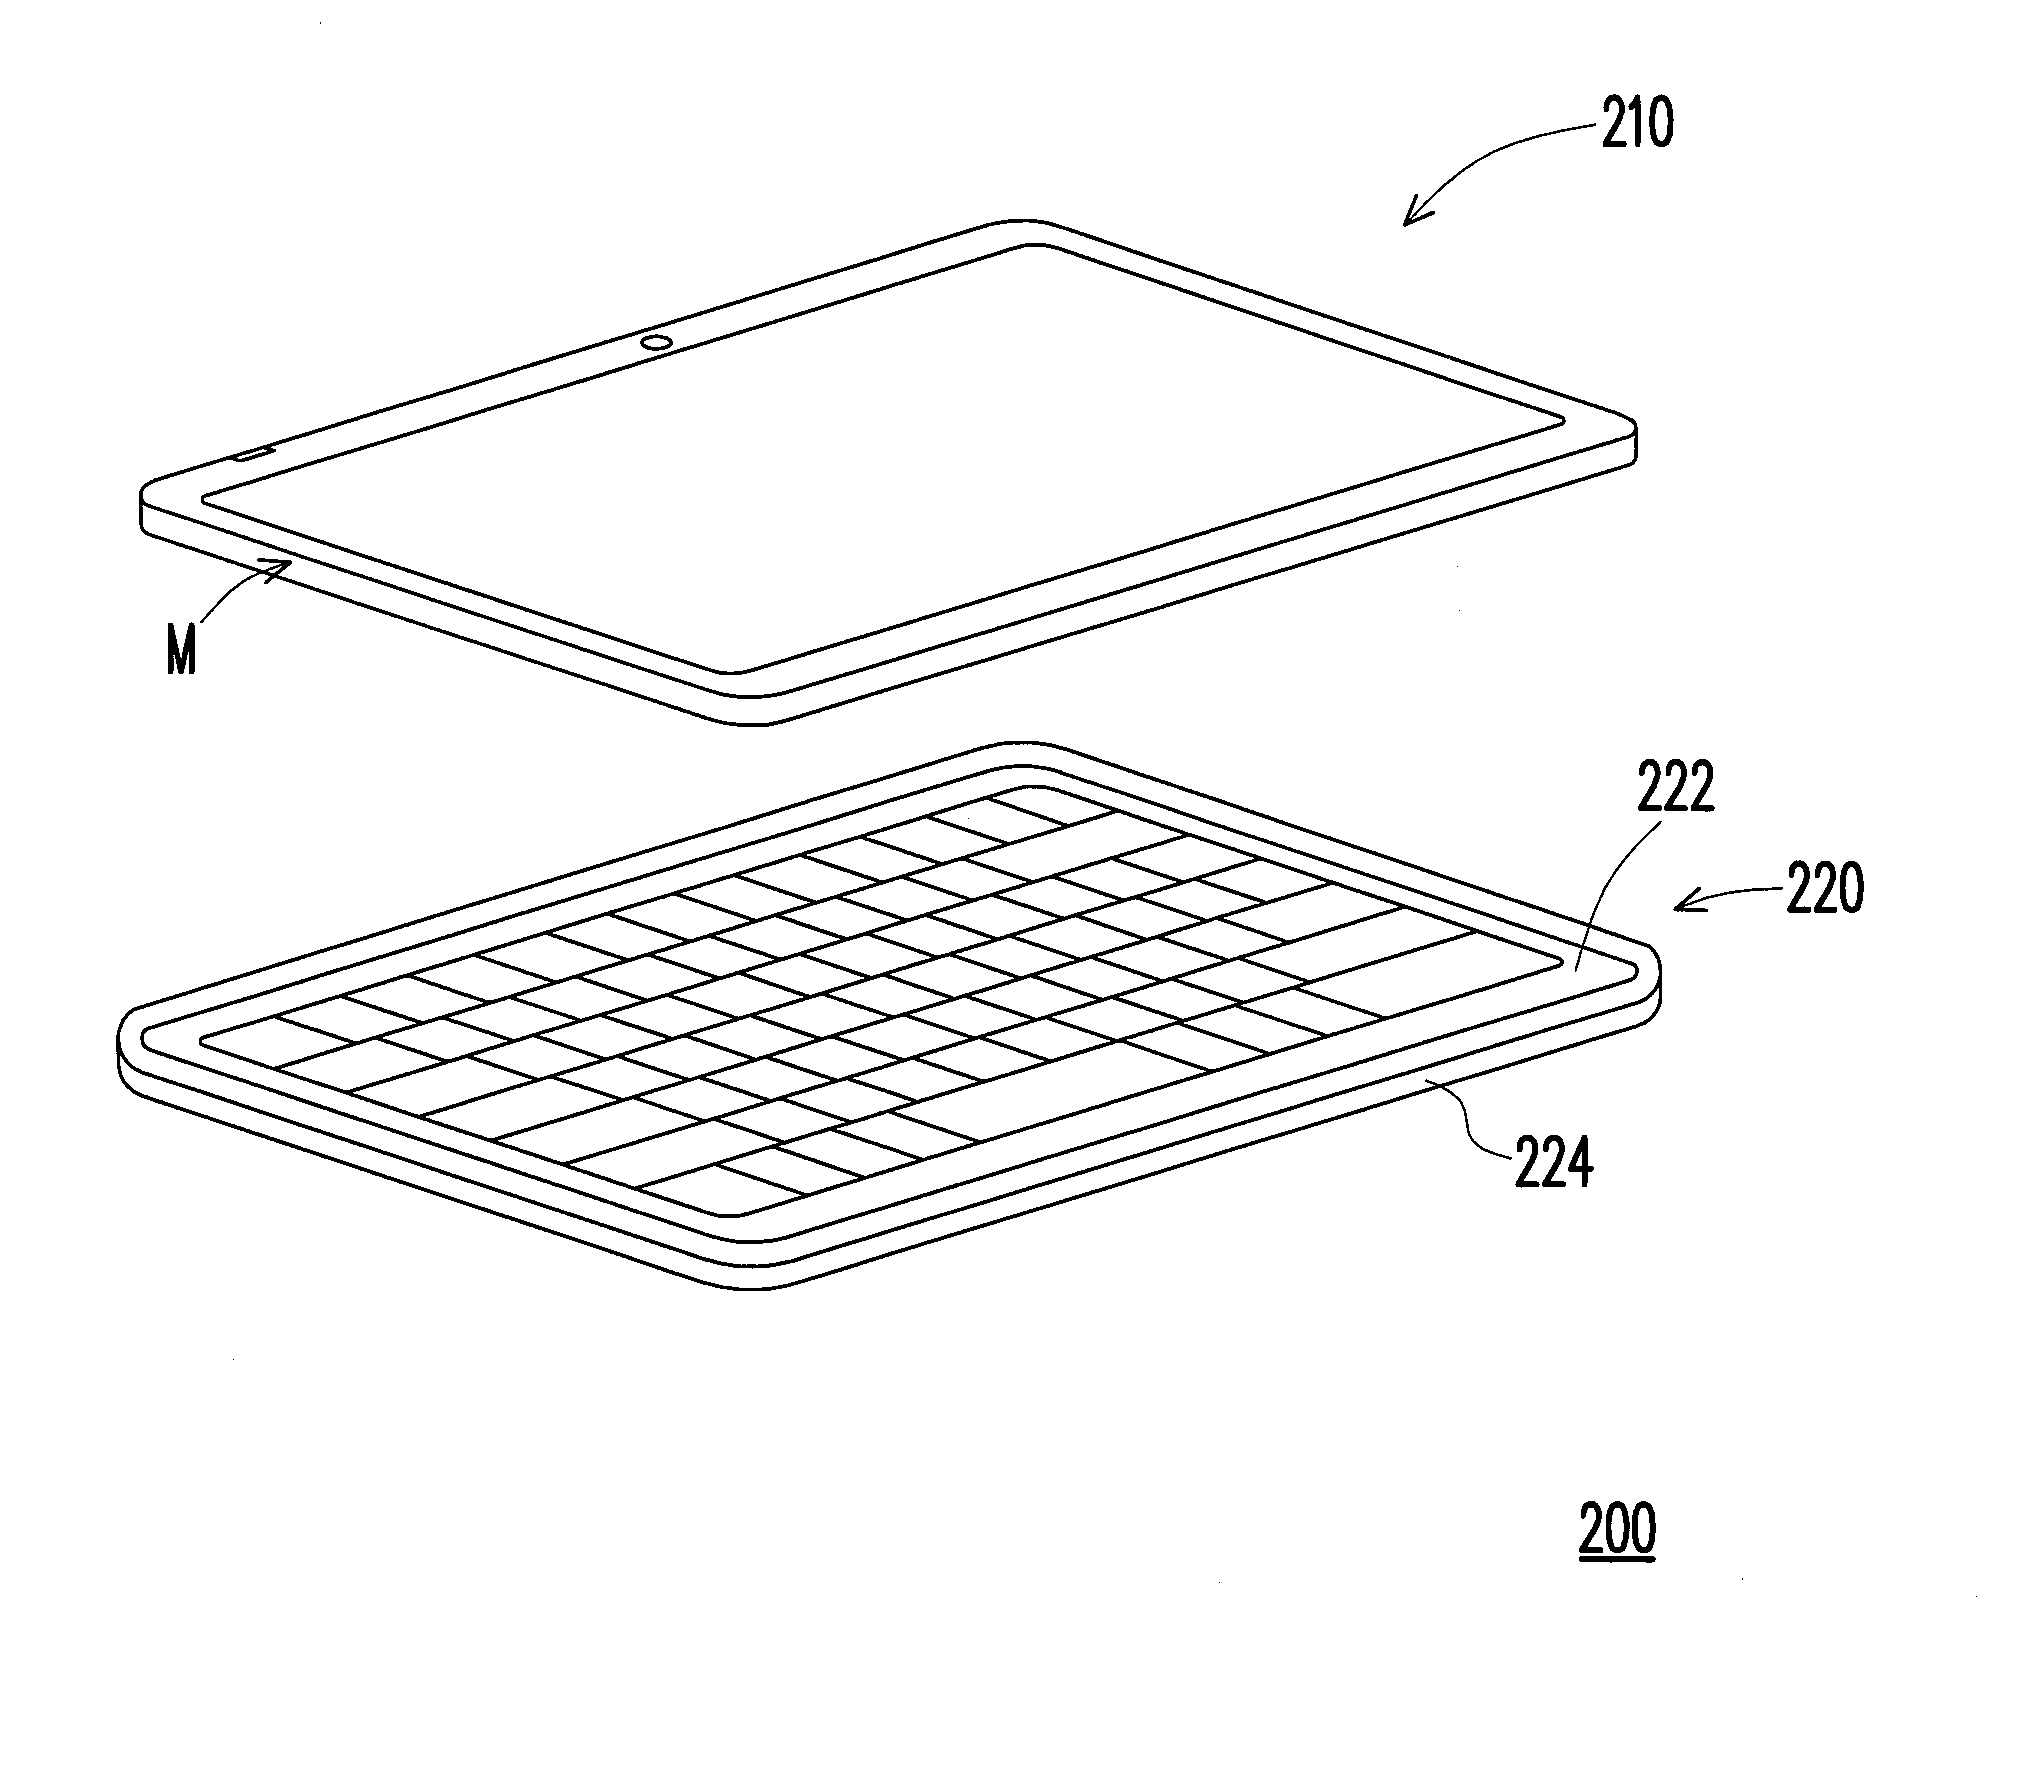 Docking station and electronic apparatus using the same